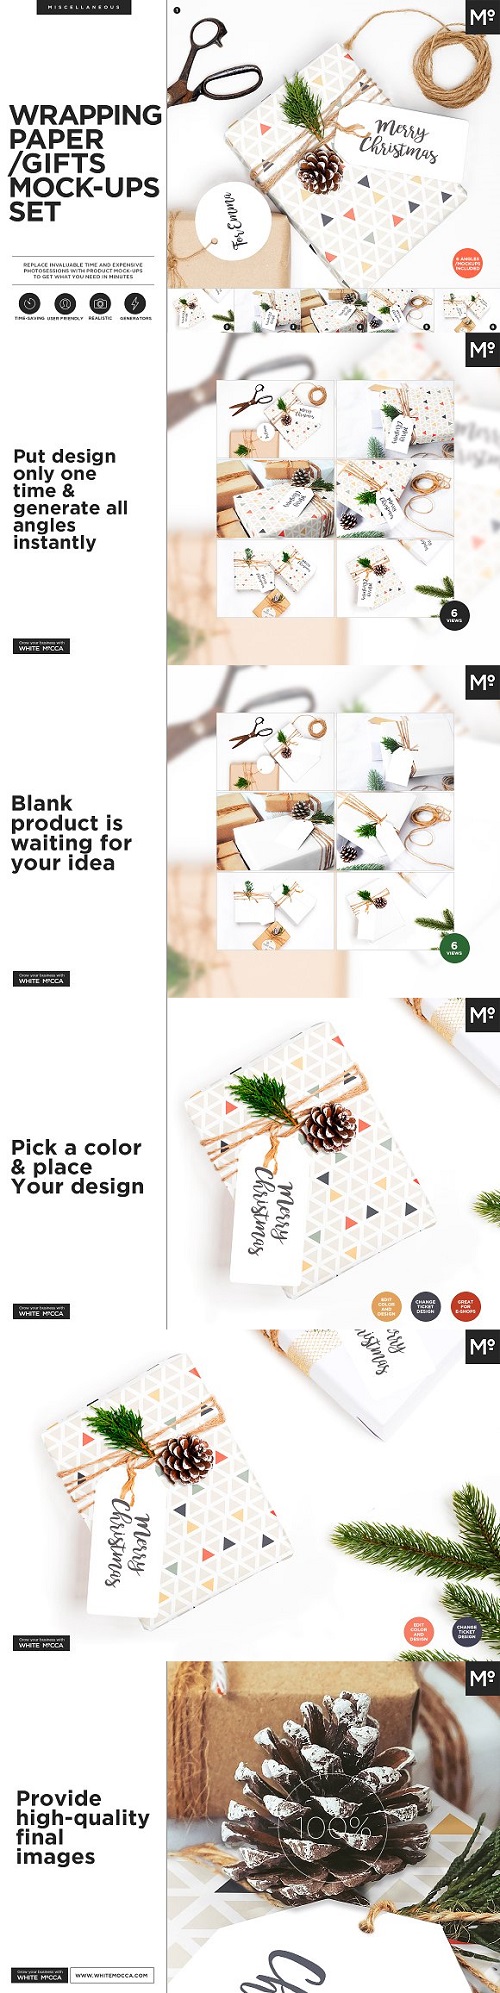 Wrapping Paper Gifts Mock-ups Set 2156718